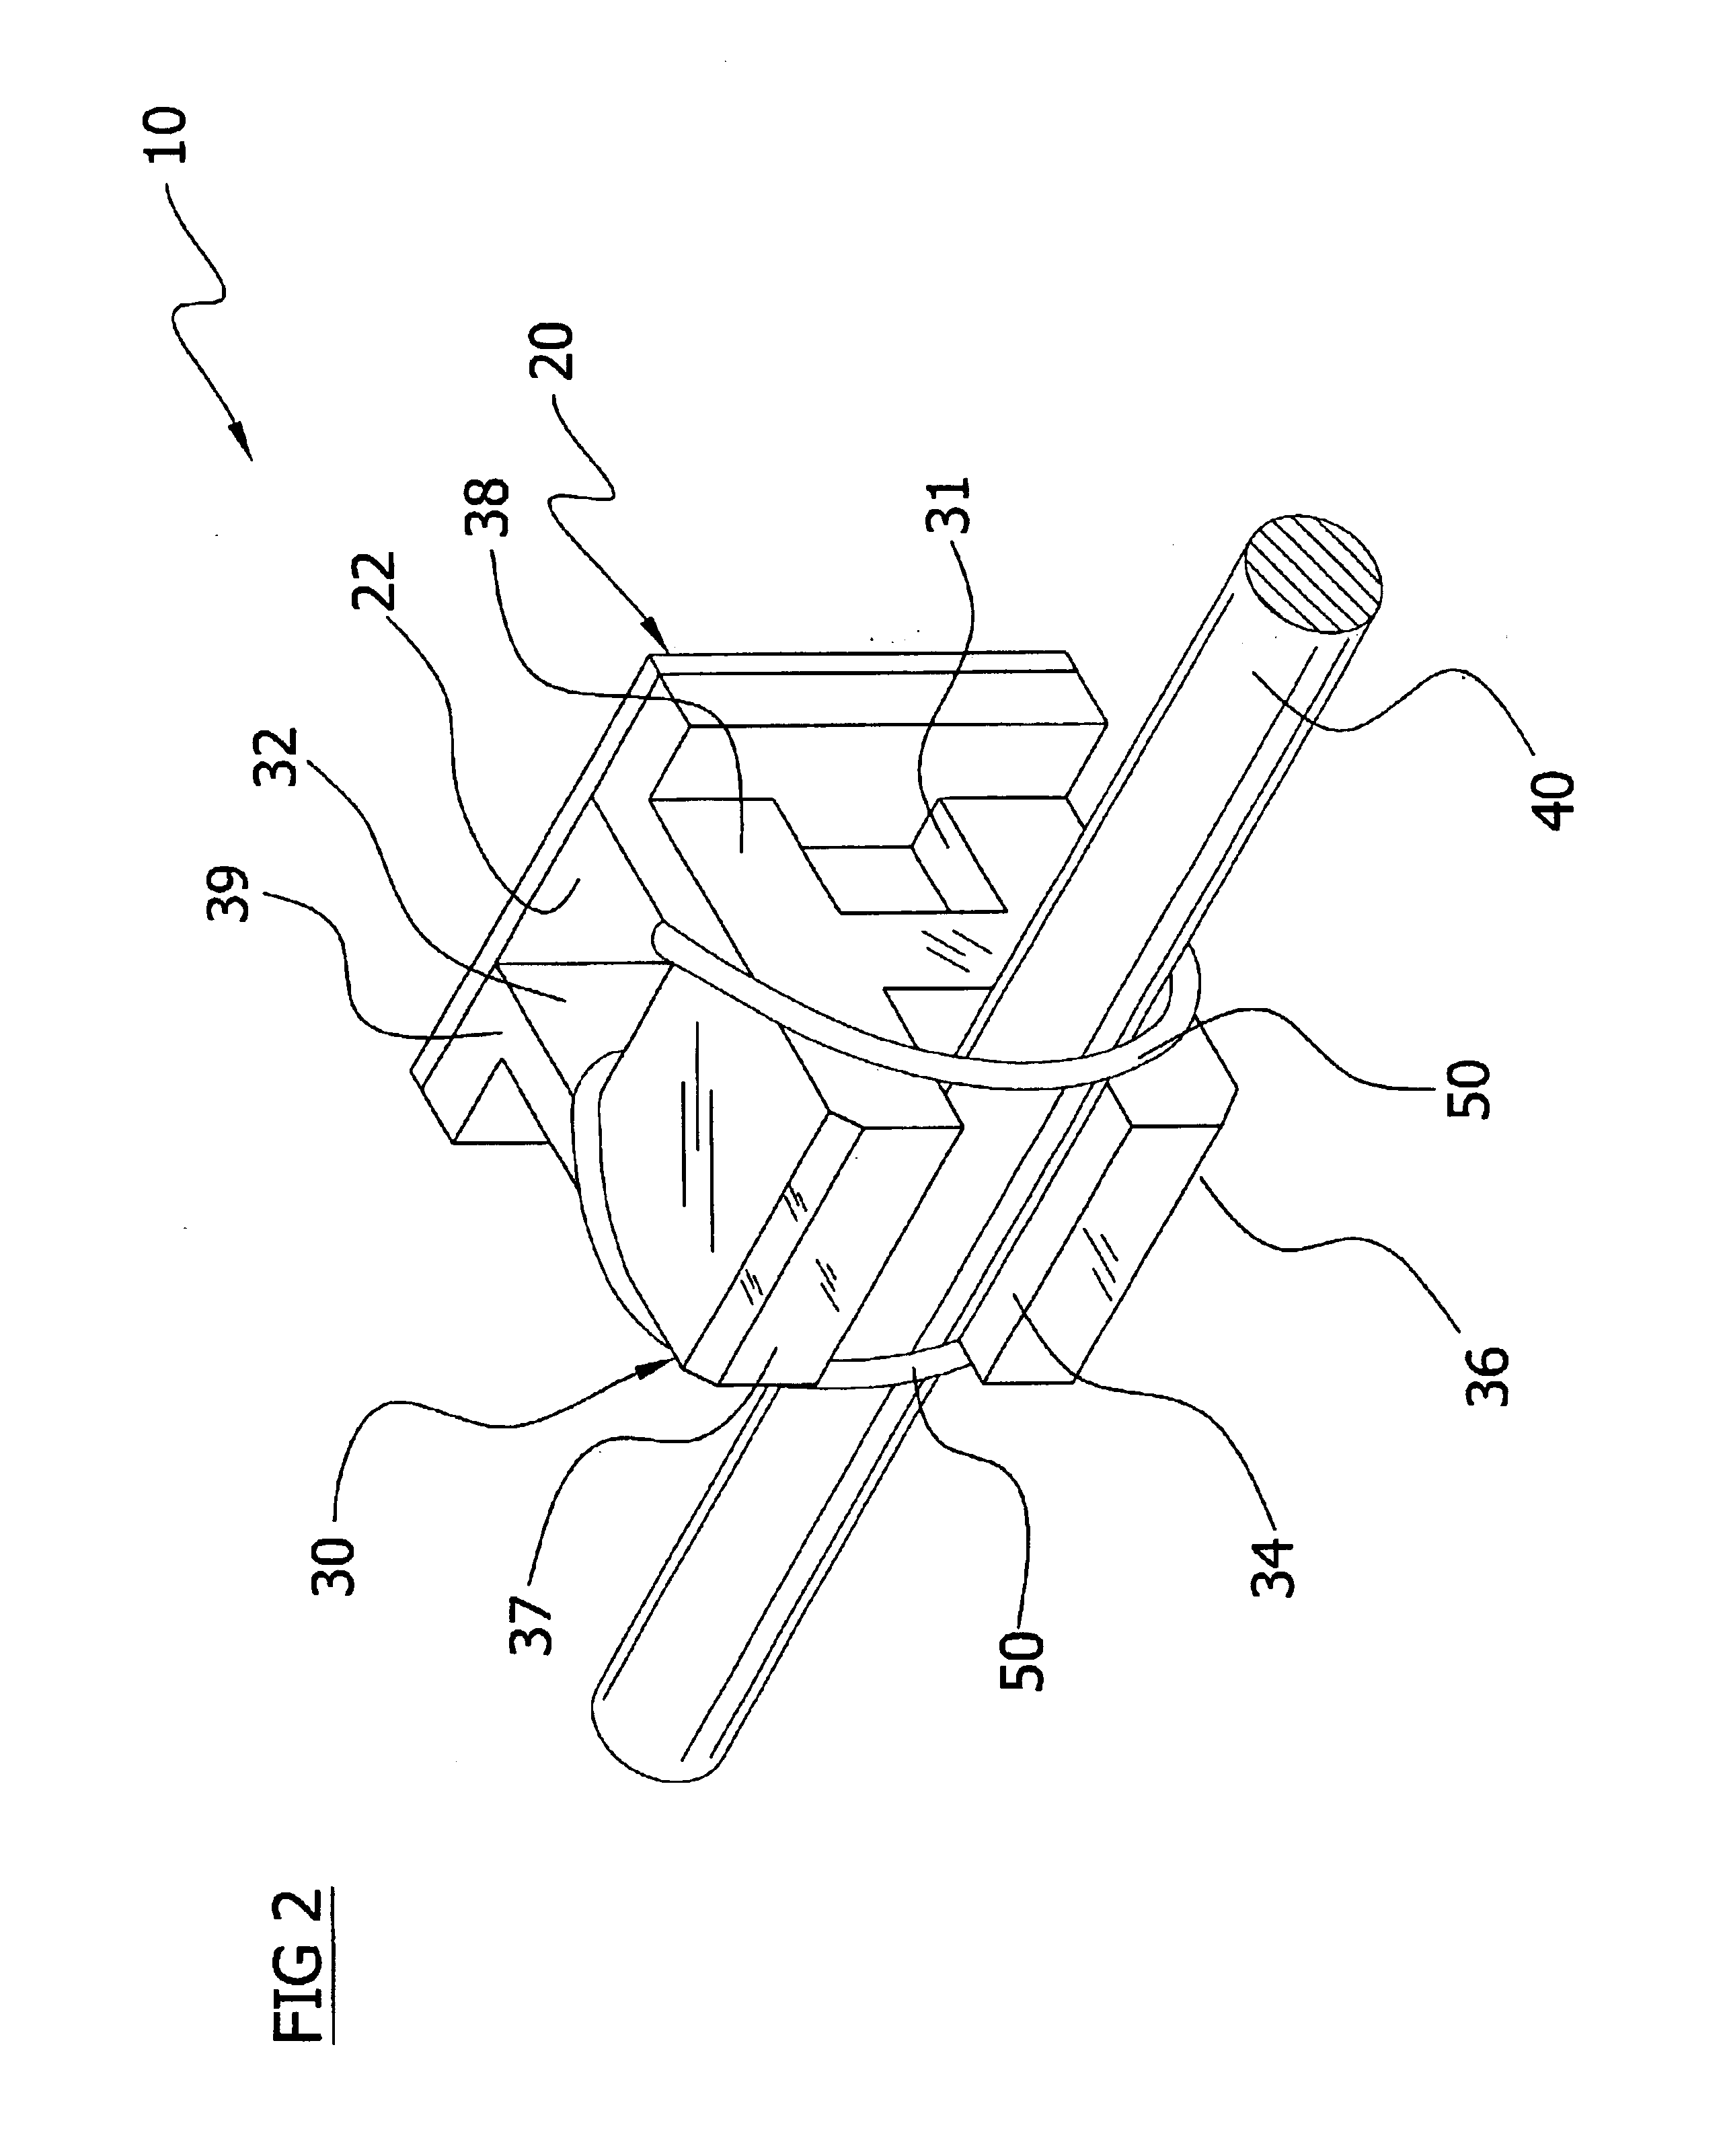 Orthodontic bracket and positioning system